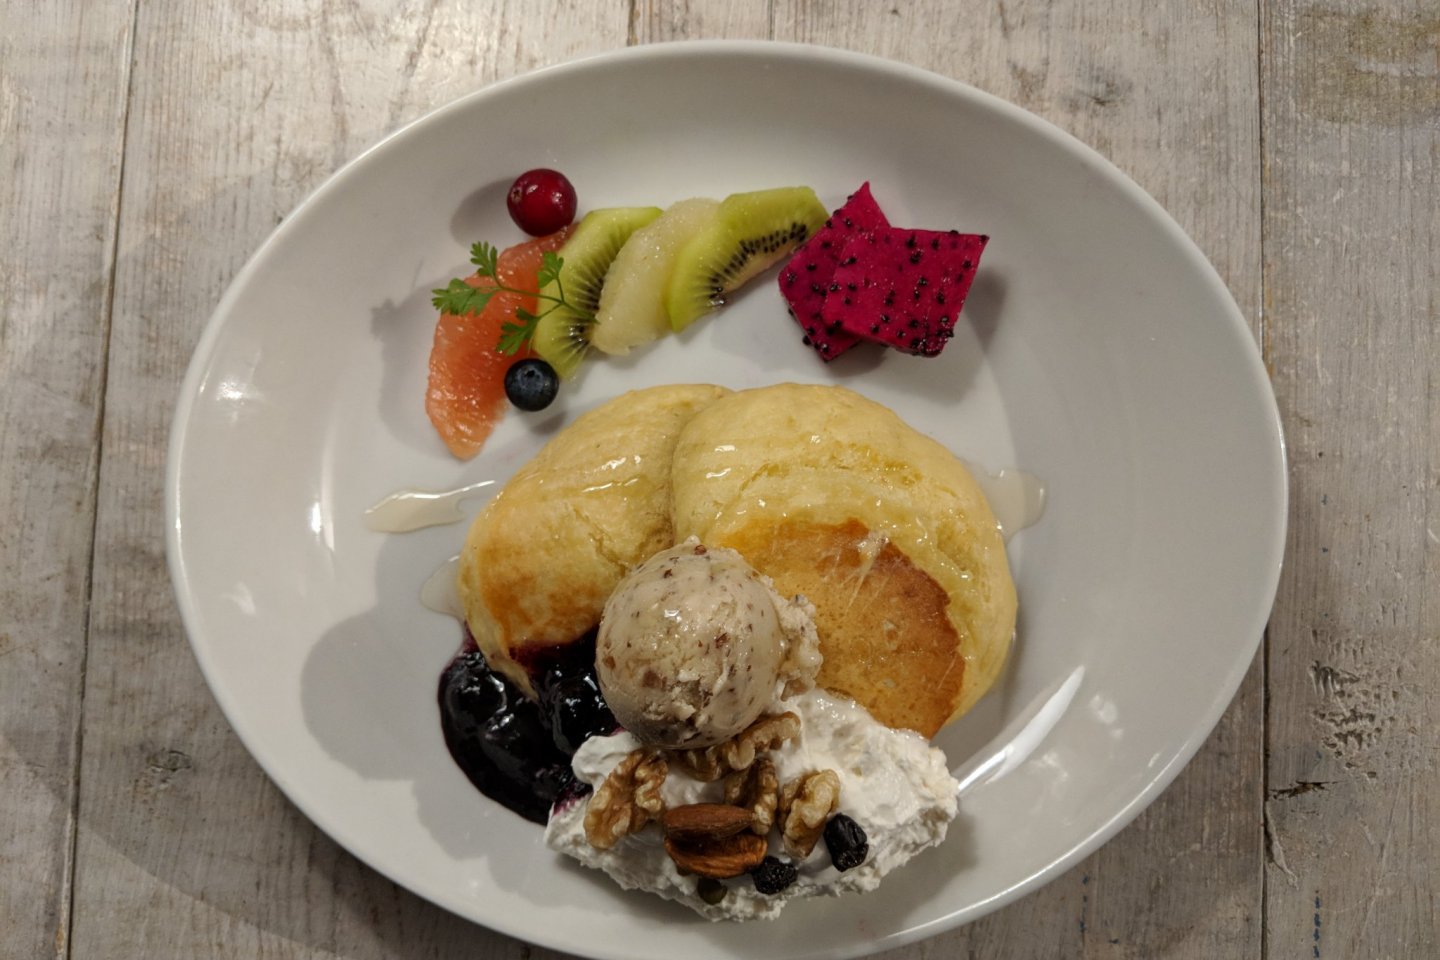 Fluffy, soufflé-style pancakes with soy whipped cream, soy ice cream, fruits and nuts